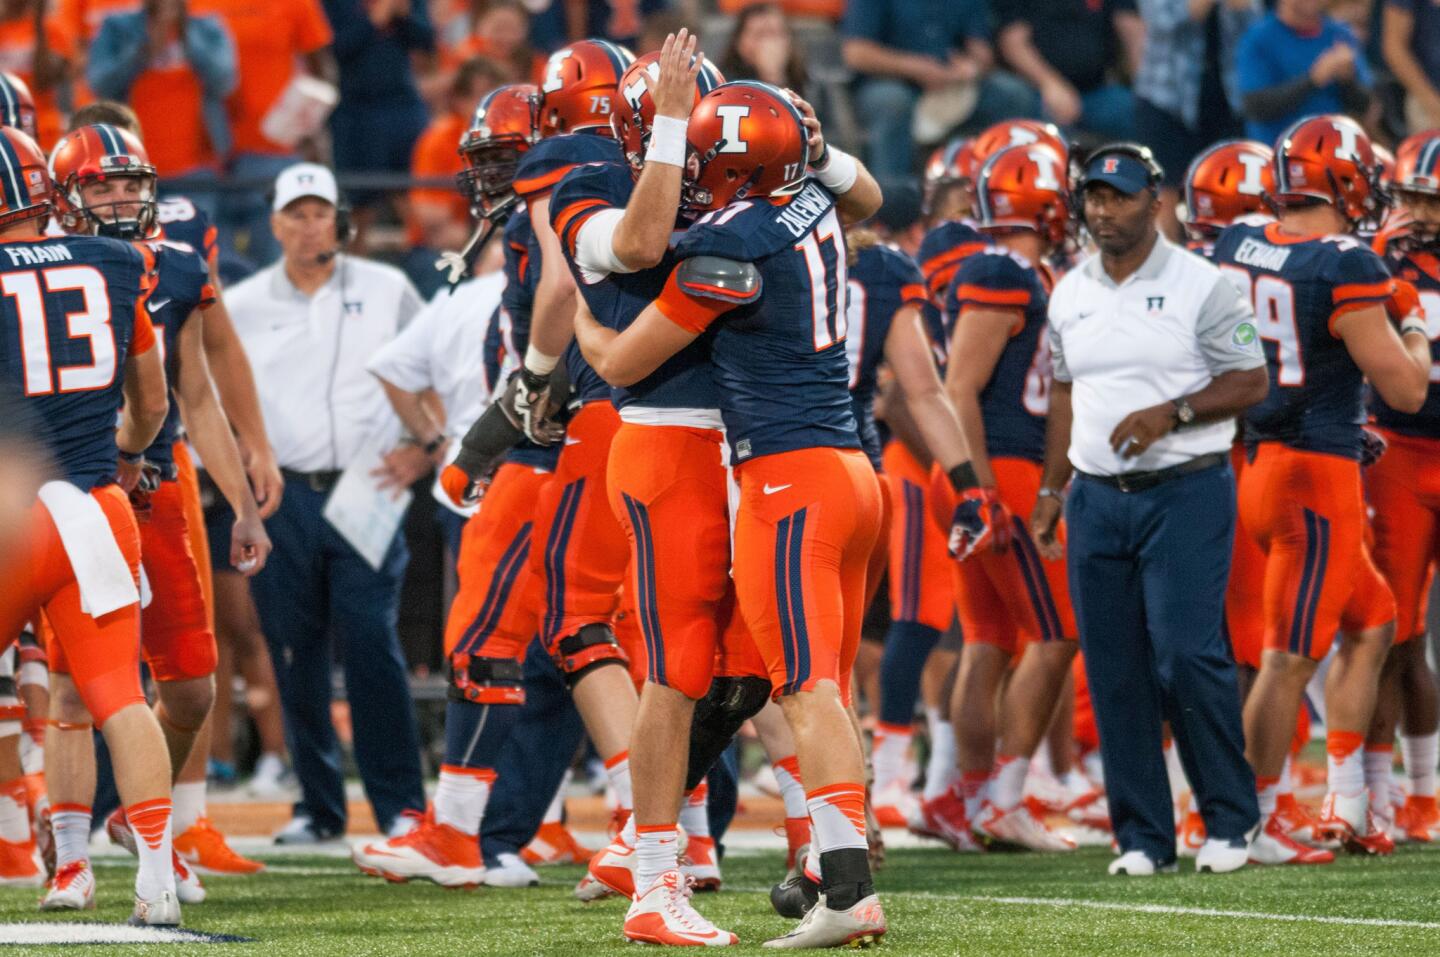 Illinois 27, Middle Tennessee 25